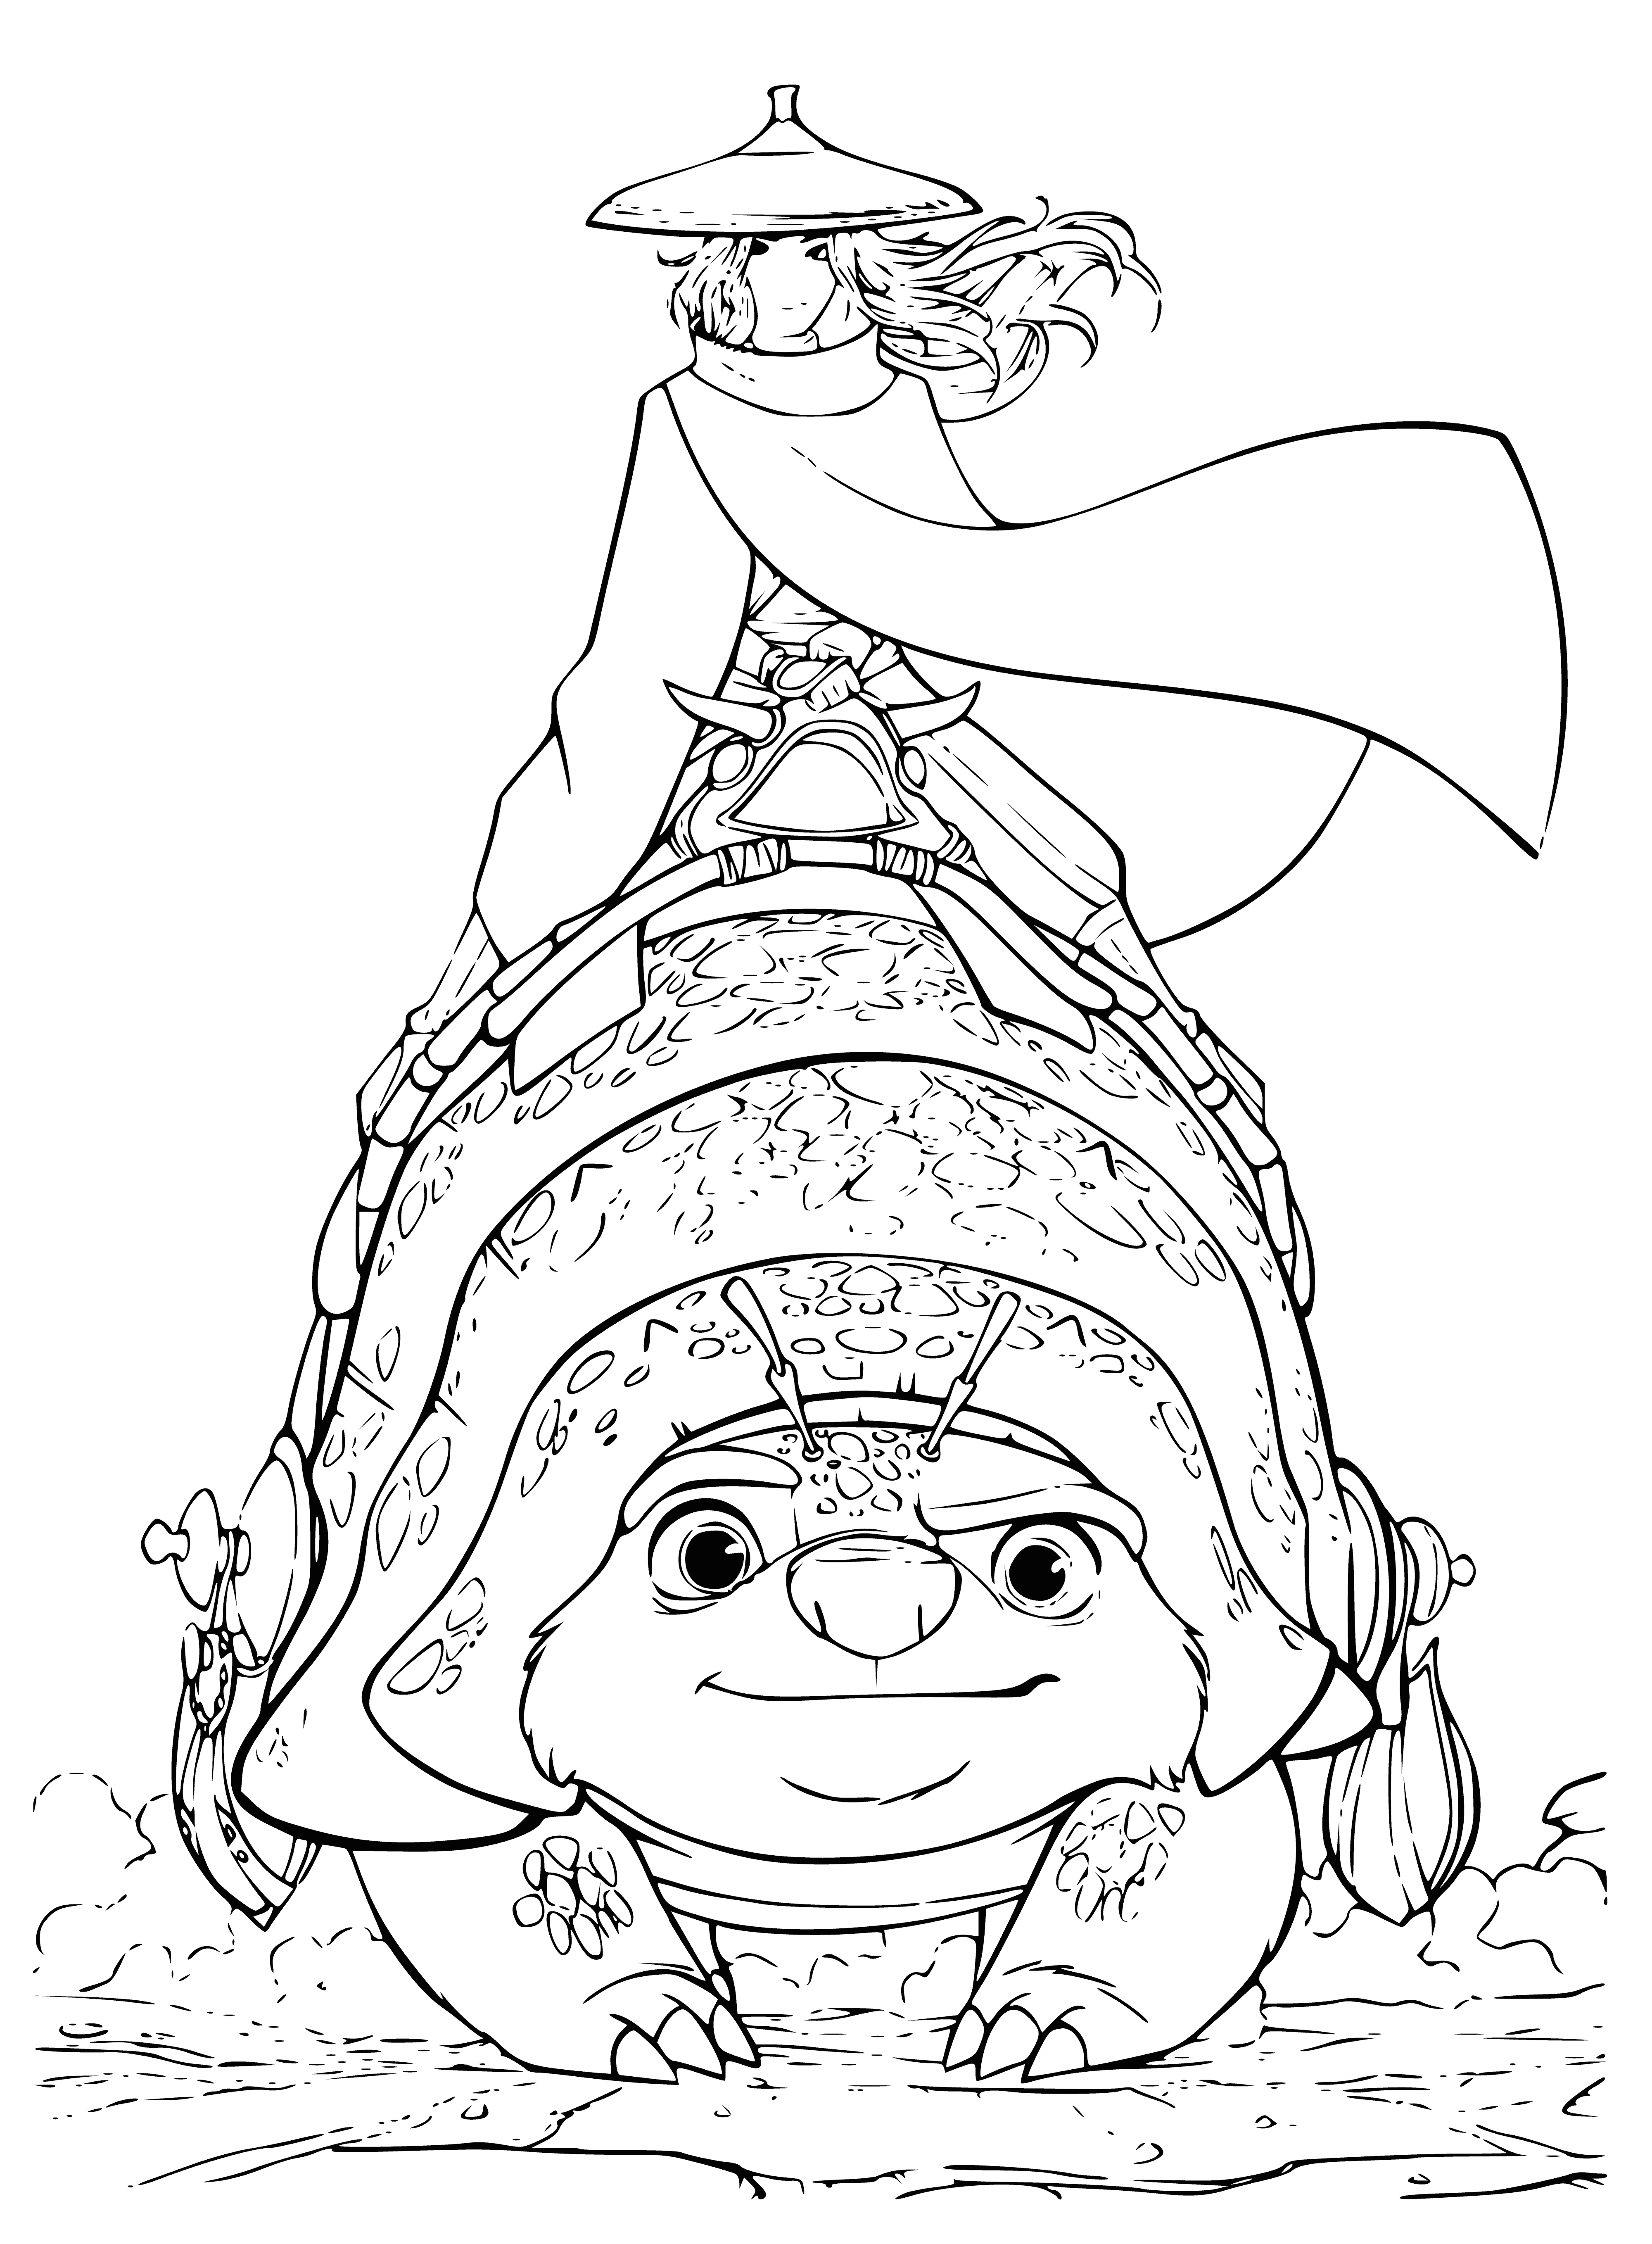 coloring page: Raya and Tuk Tuk face off against a giant dragon, ready to fight with a spear in hand.